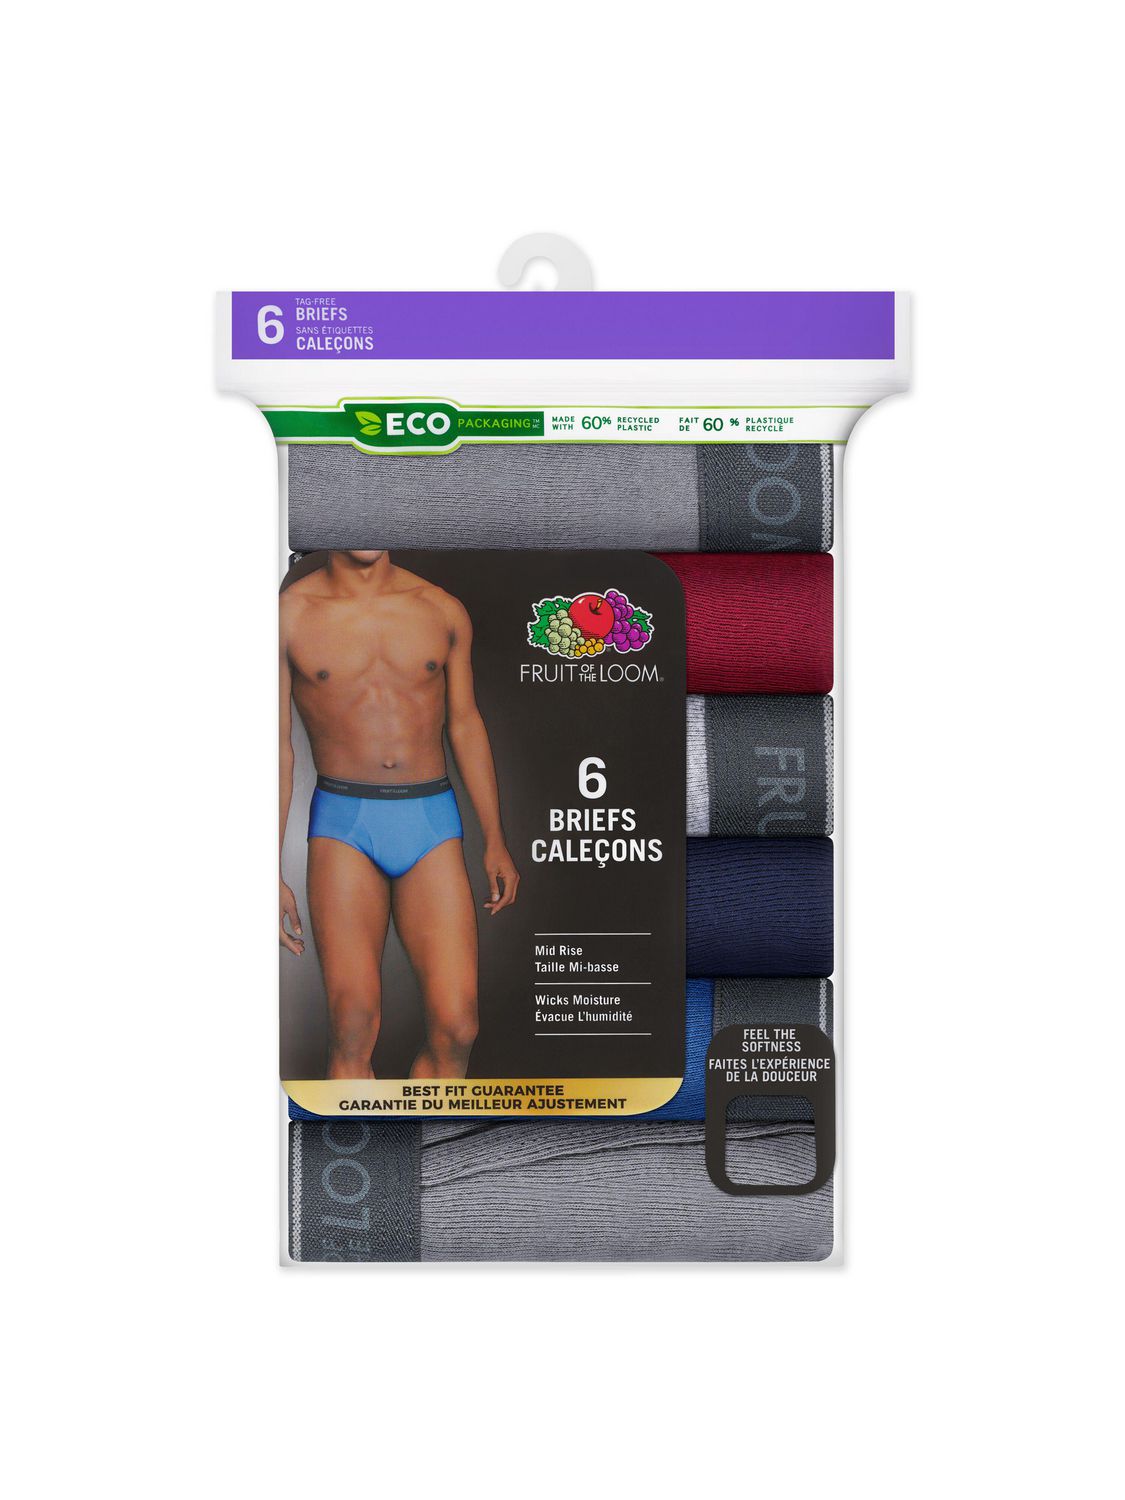 Buy Fruit of the LoomMen's Basic Brief Underwear (Pack of 7